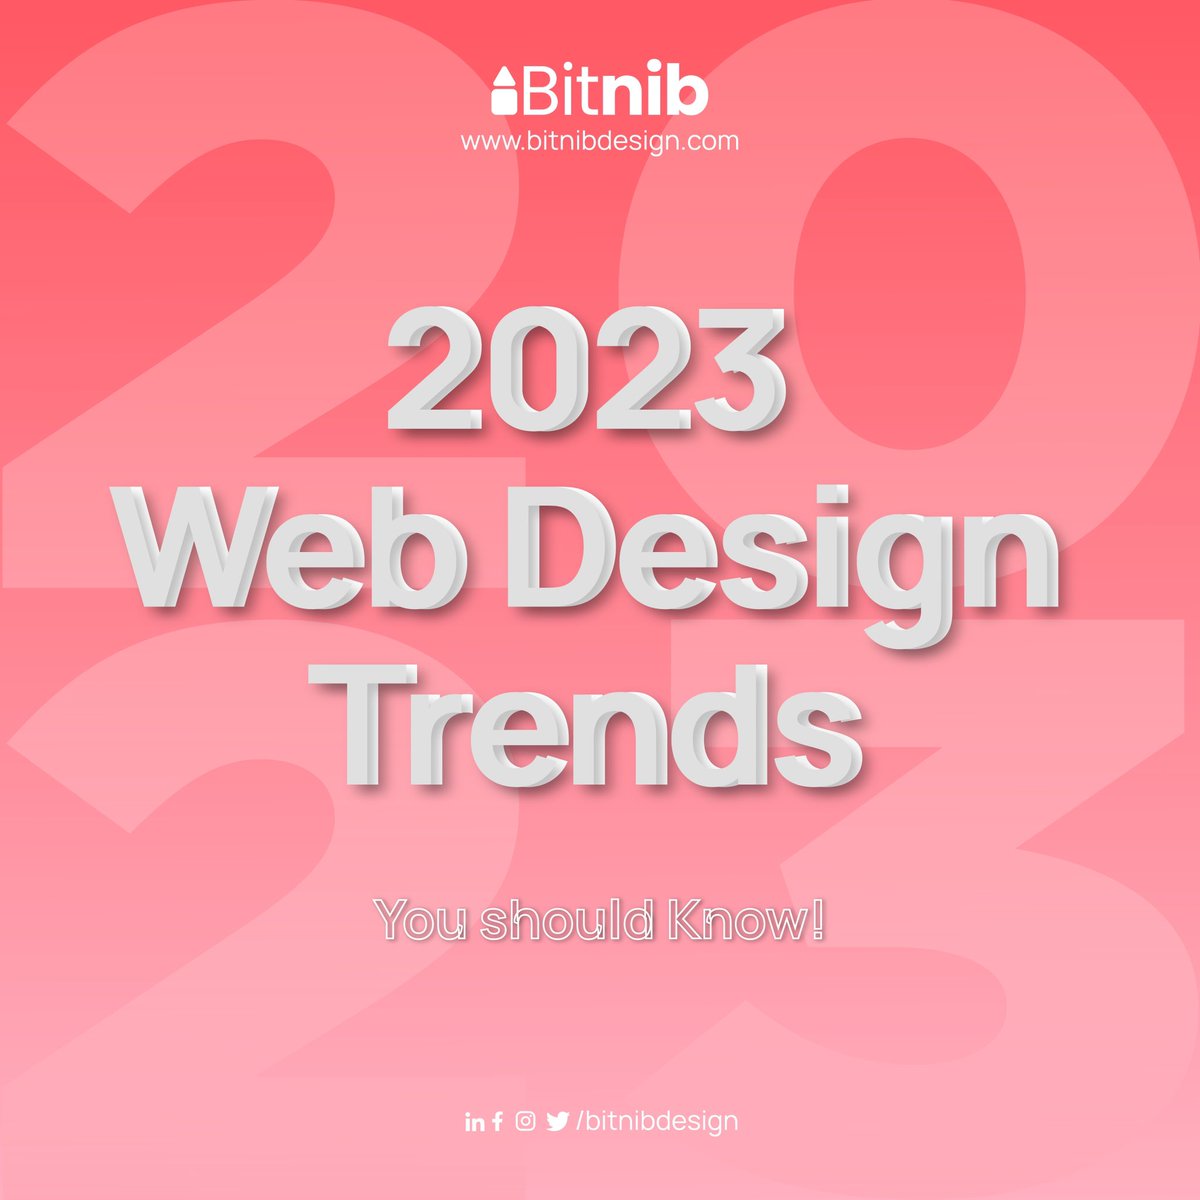 7 top-notch web design trends of 2023 -

1. Artificial Intelligence 

2. Minimalism 

3. Microinteractions 

4. Responsive Design

5. Augmented reality

6. Dark mode

7. Nostalgia 

What's your favorite web design trend of 2023?

#Bitnib #BitnibDesign #webdesigntrends #webdesign